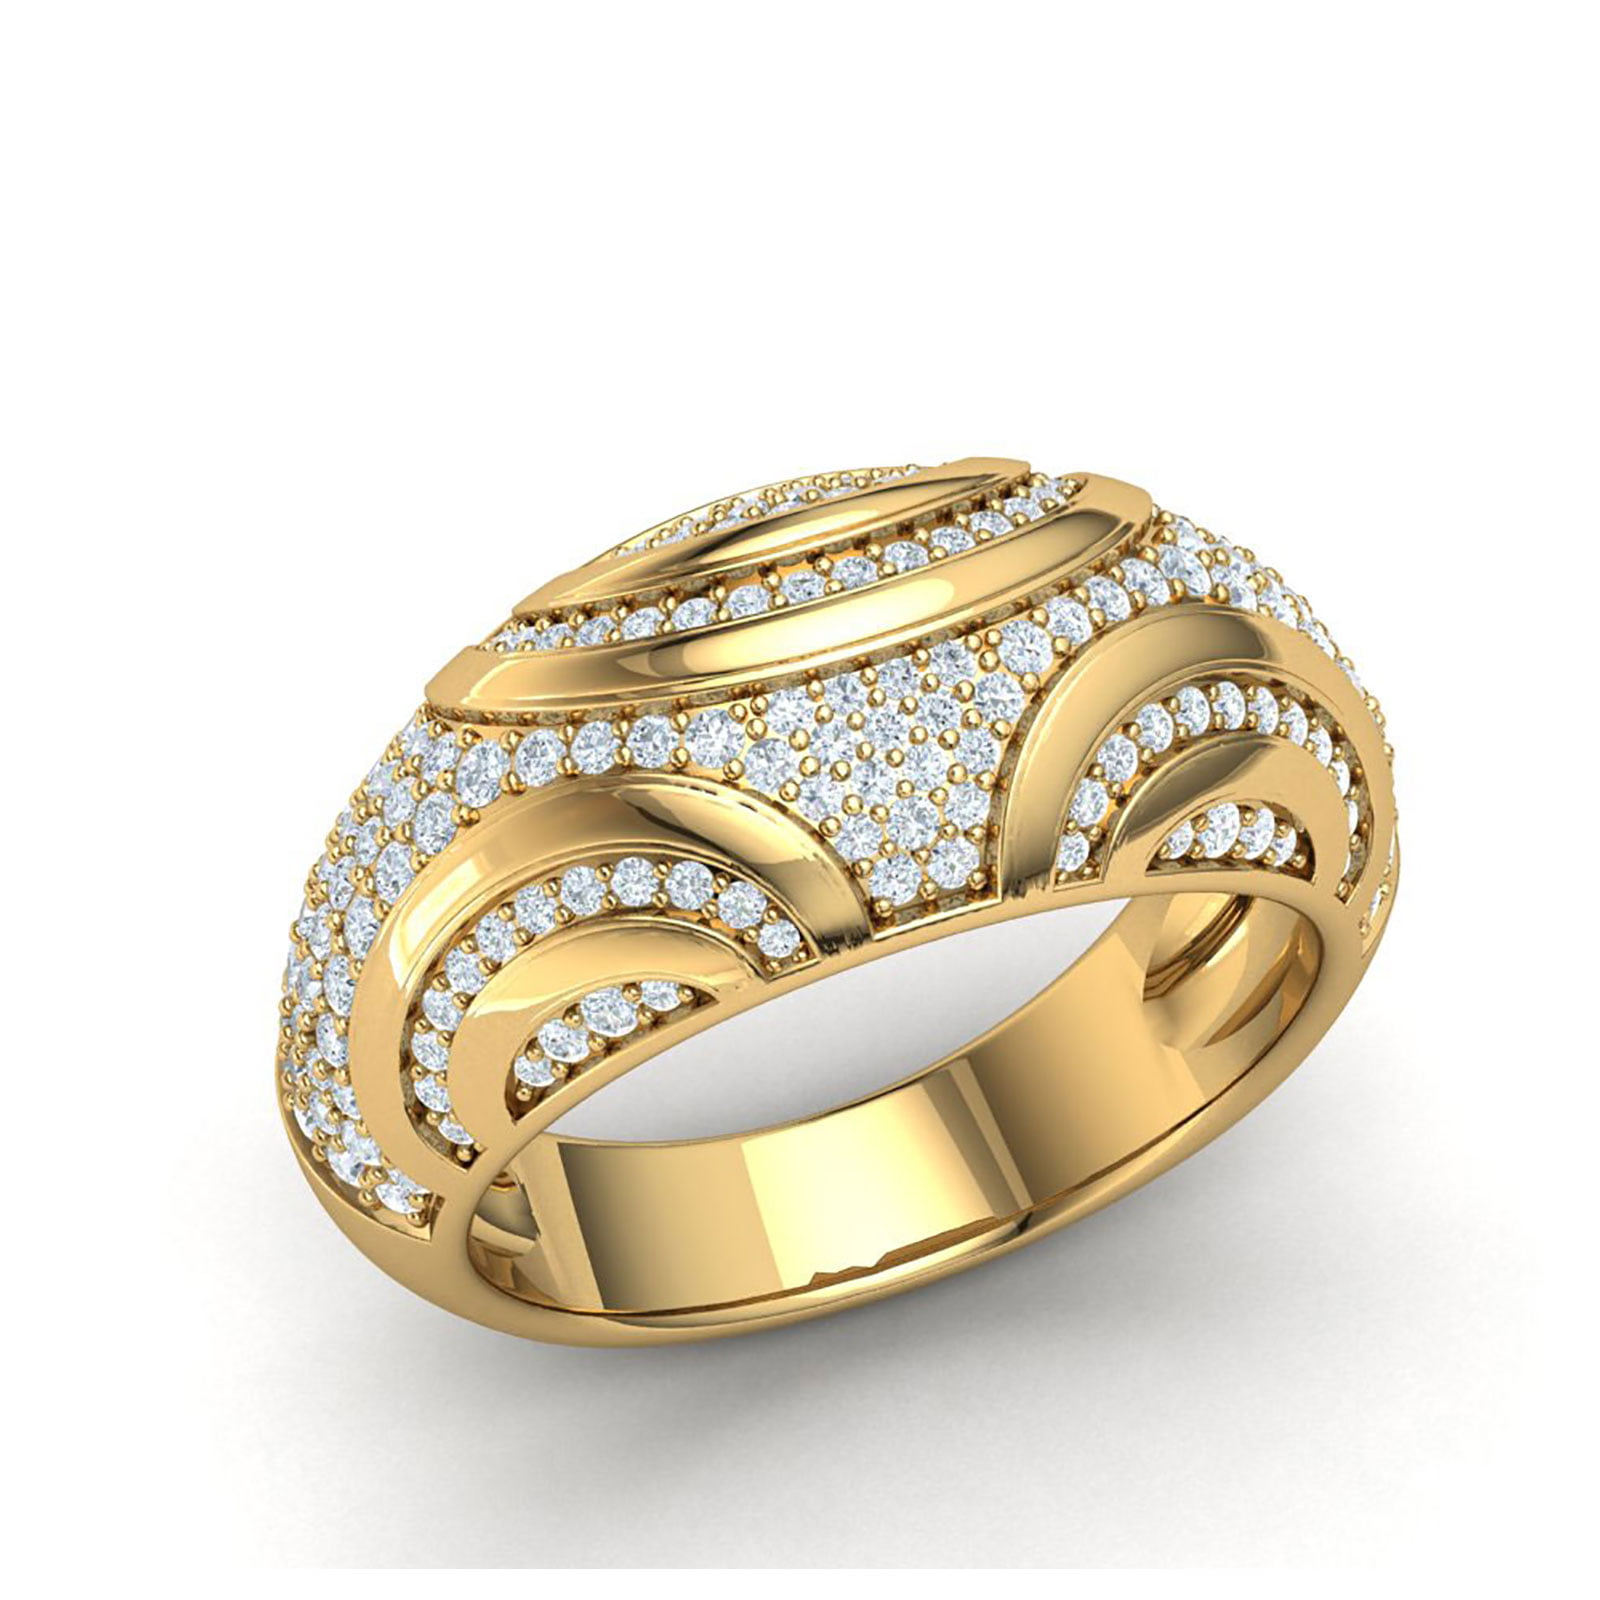 22ct Gold Ring Band with Antique Finish | Bridal Ring